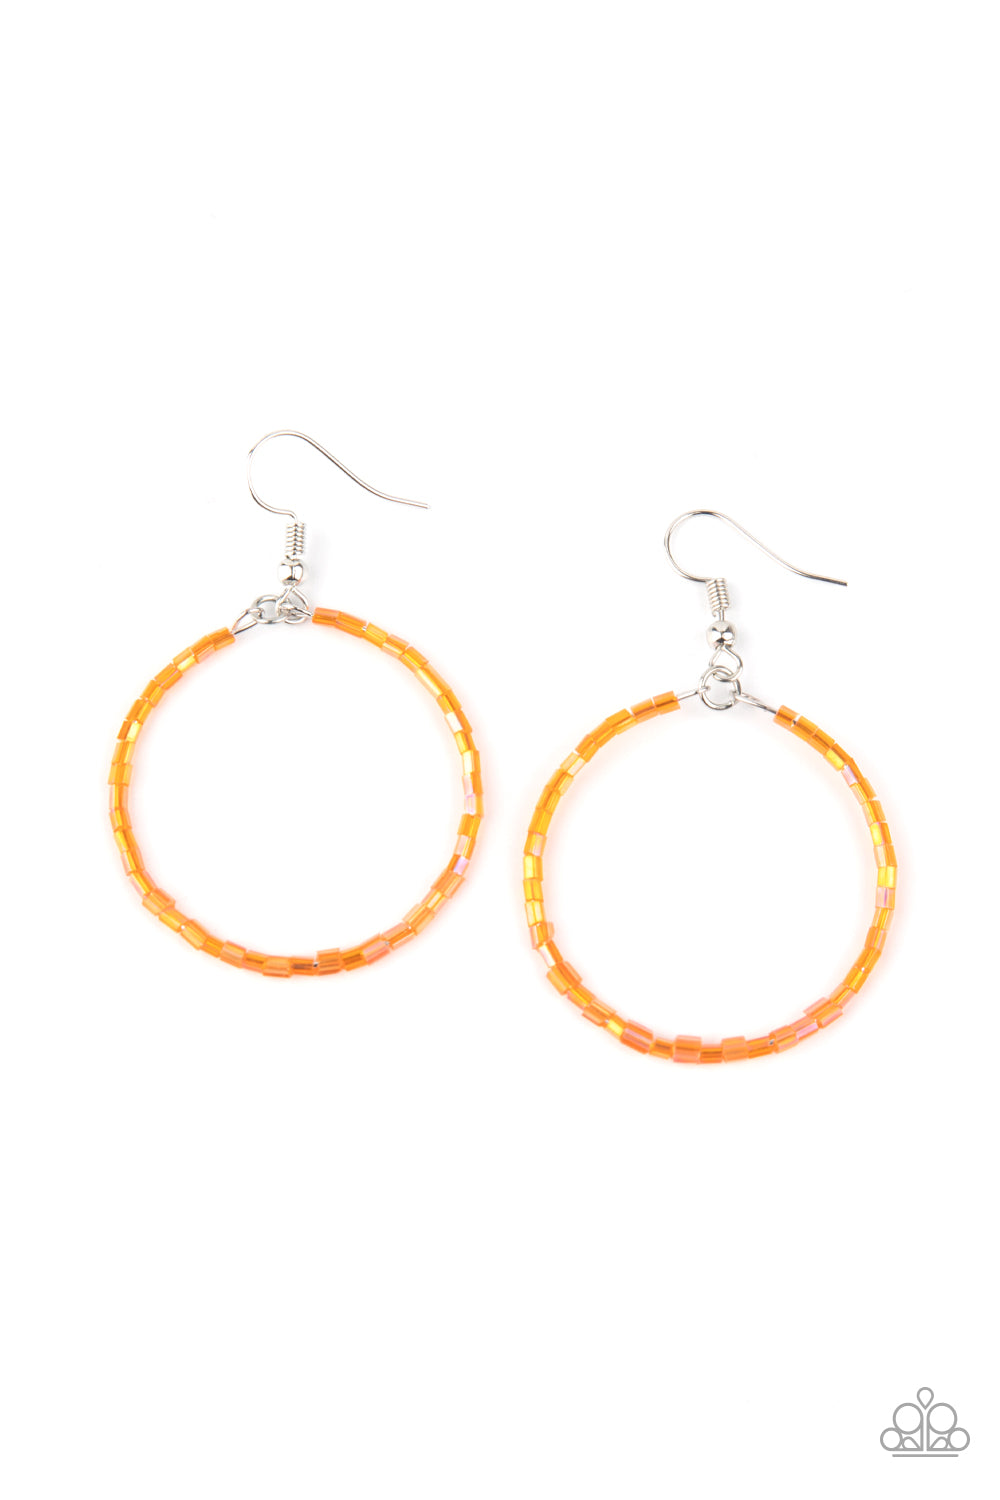 shop-sassy-affordable- colorfully-curvy-orange-paparazzi-accessories